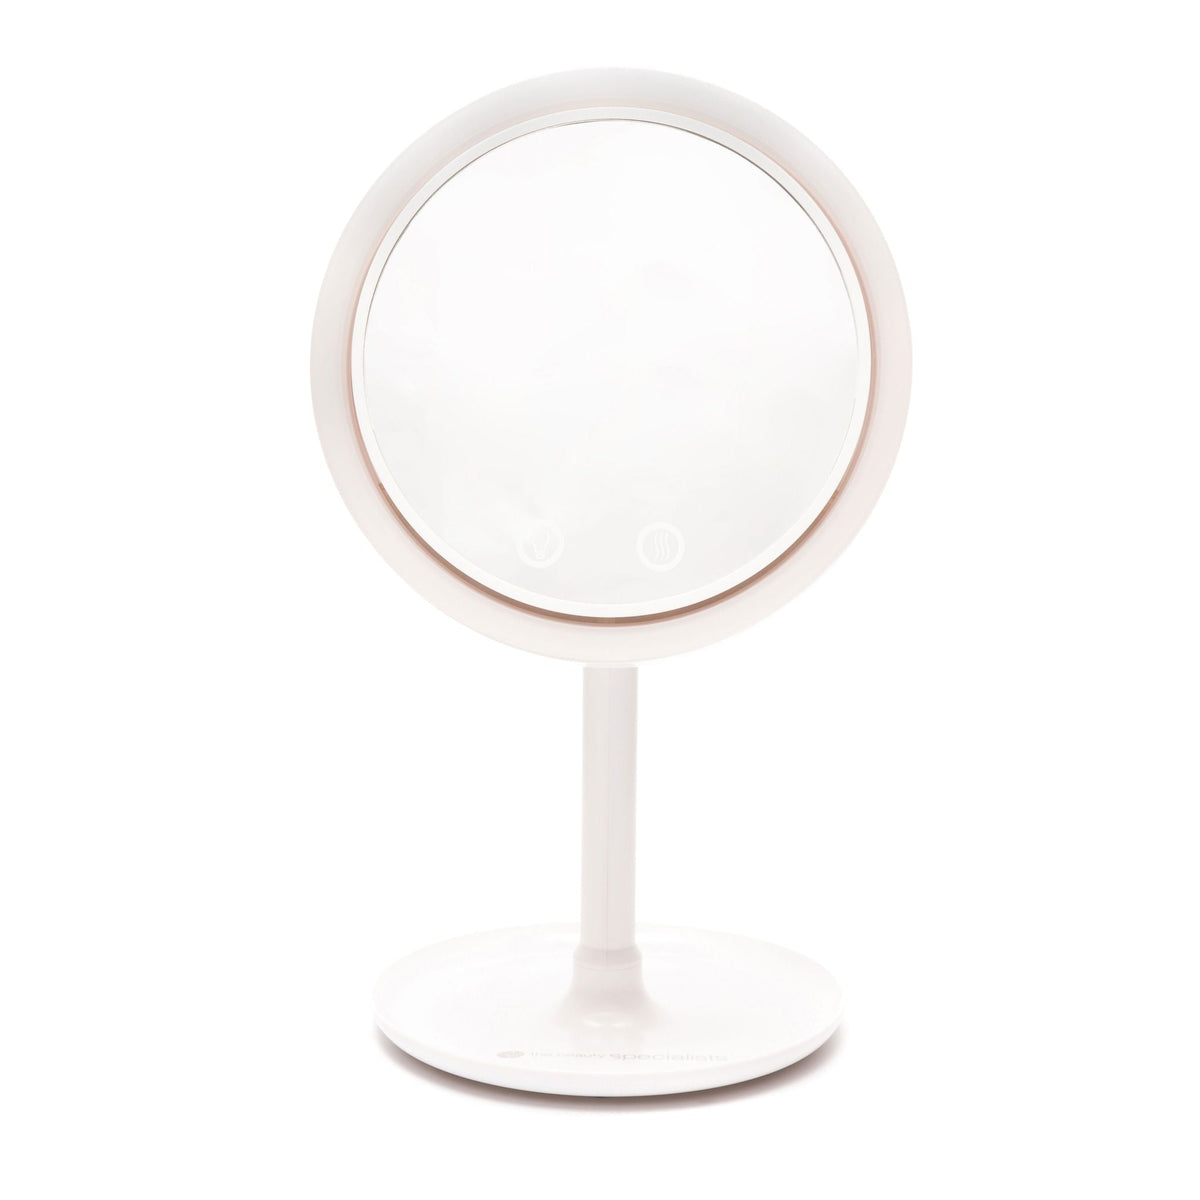 Keep cool mirror with fan and LED light ring